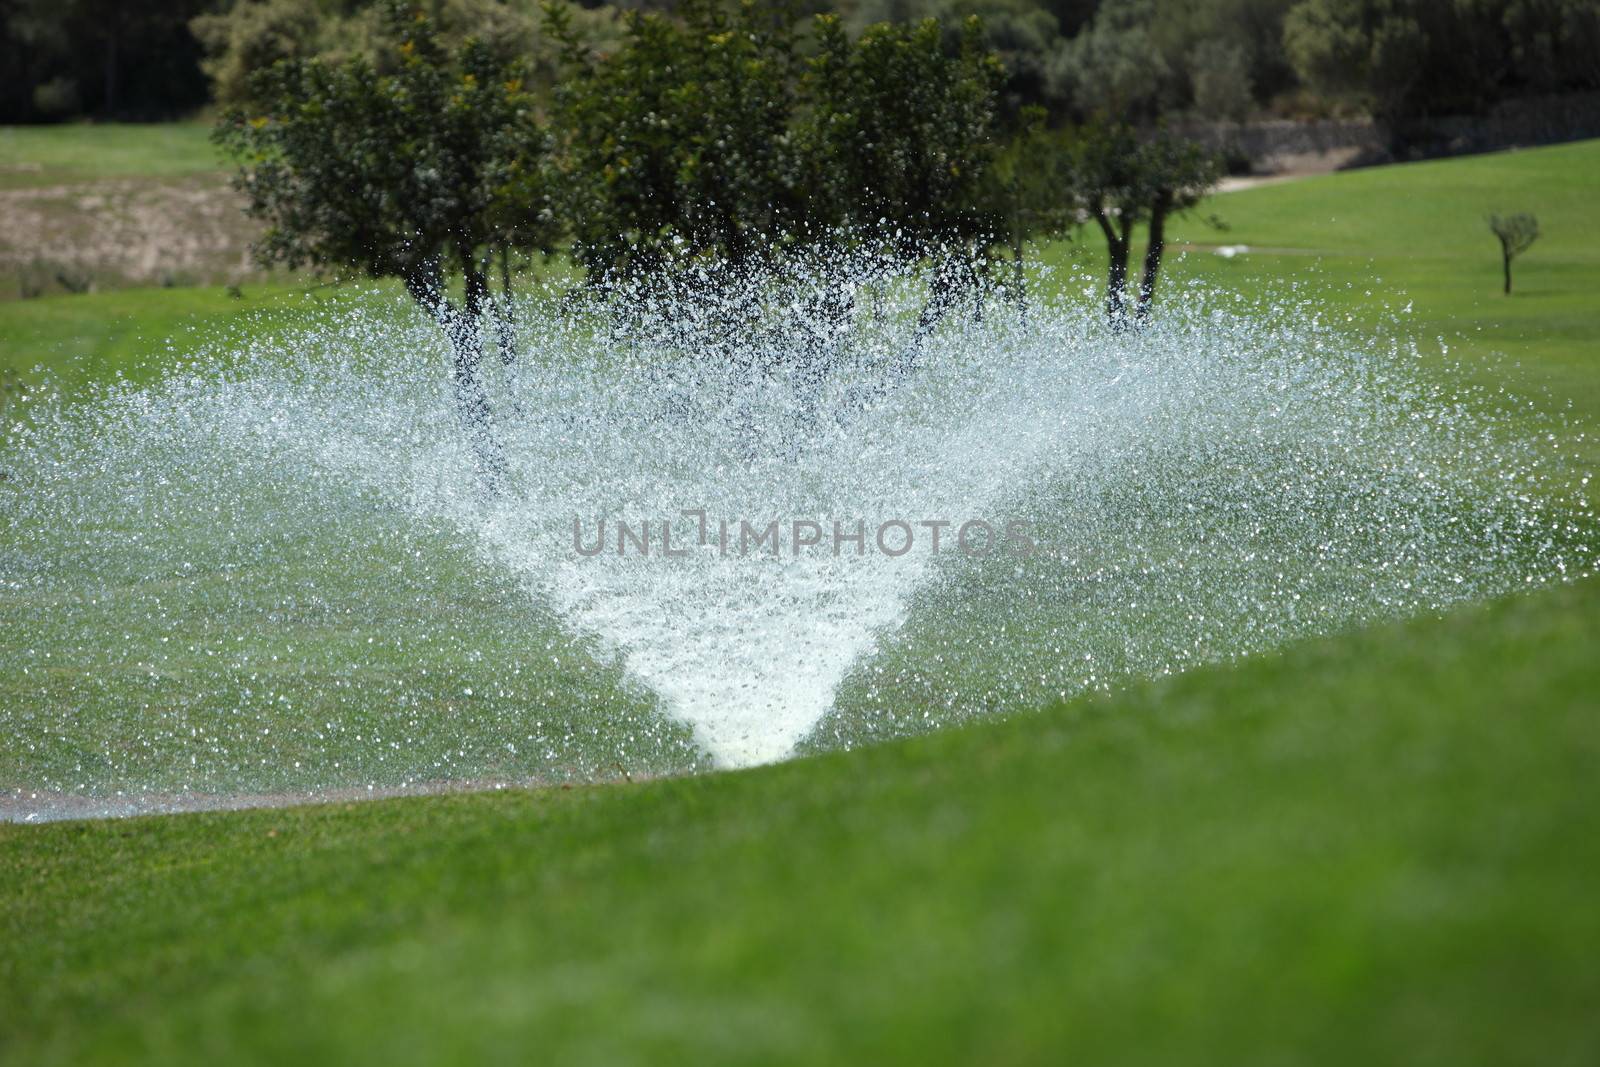 Sprinkler on a golf course spraying the greens with the water droplets glinting in the sunlight